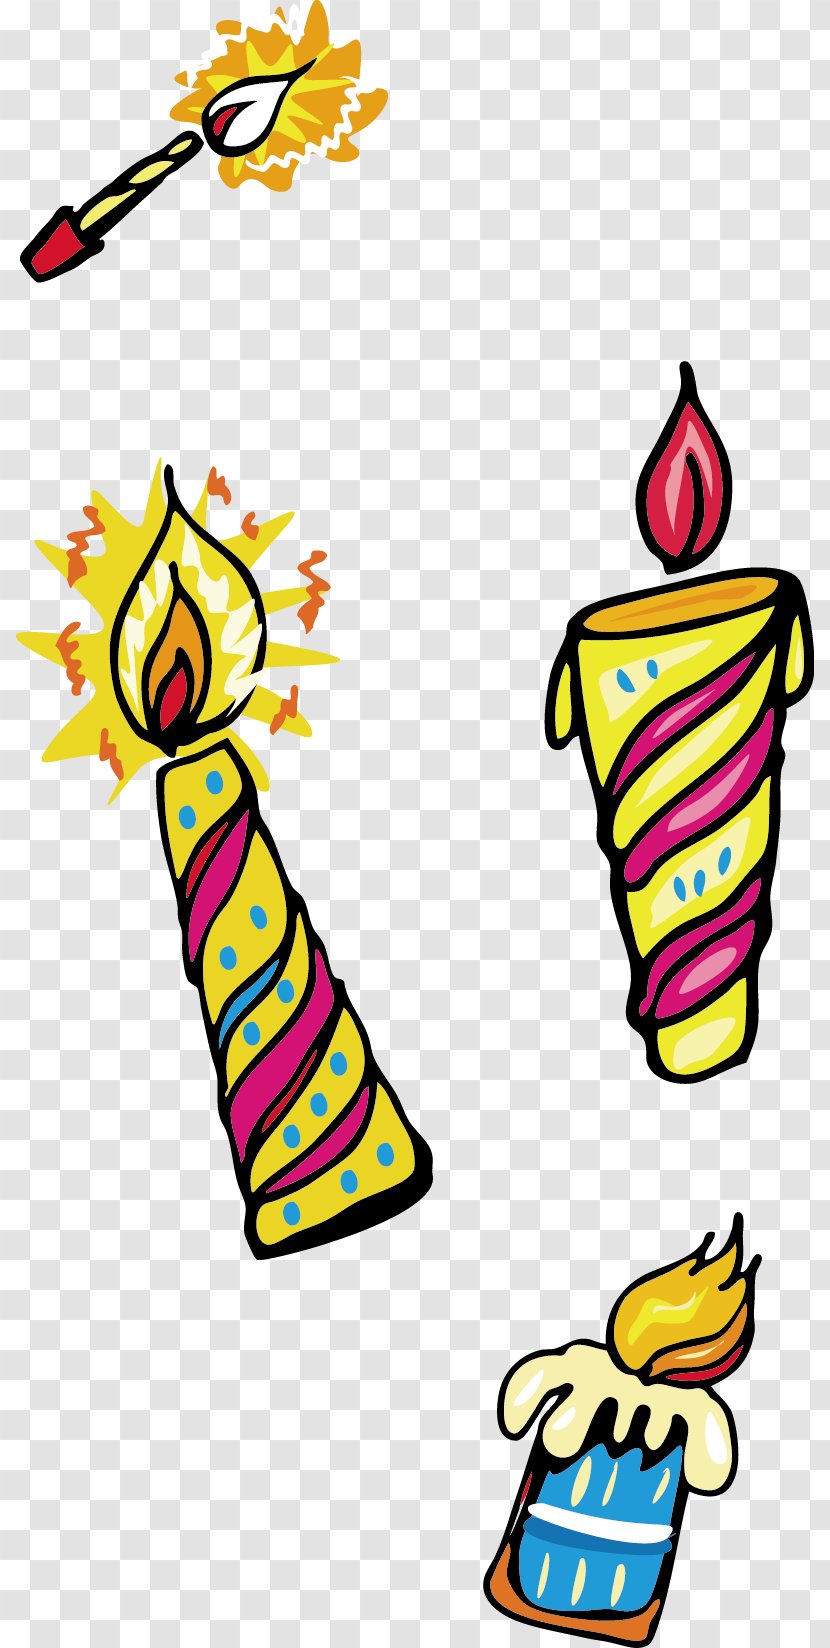 Candle Clip Art - Software - Christmas Candles Pull Free Transparent PNG